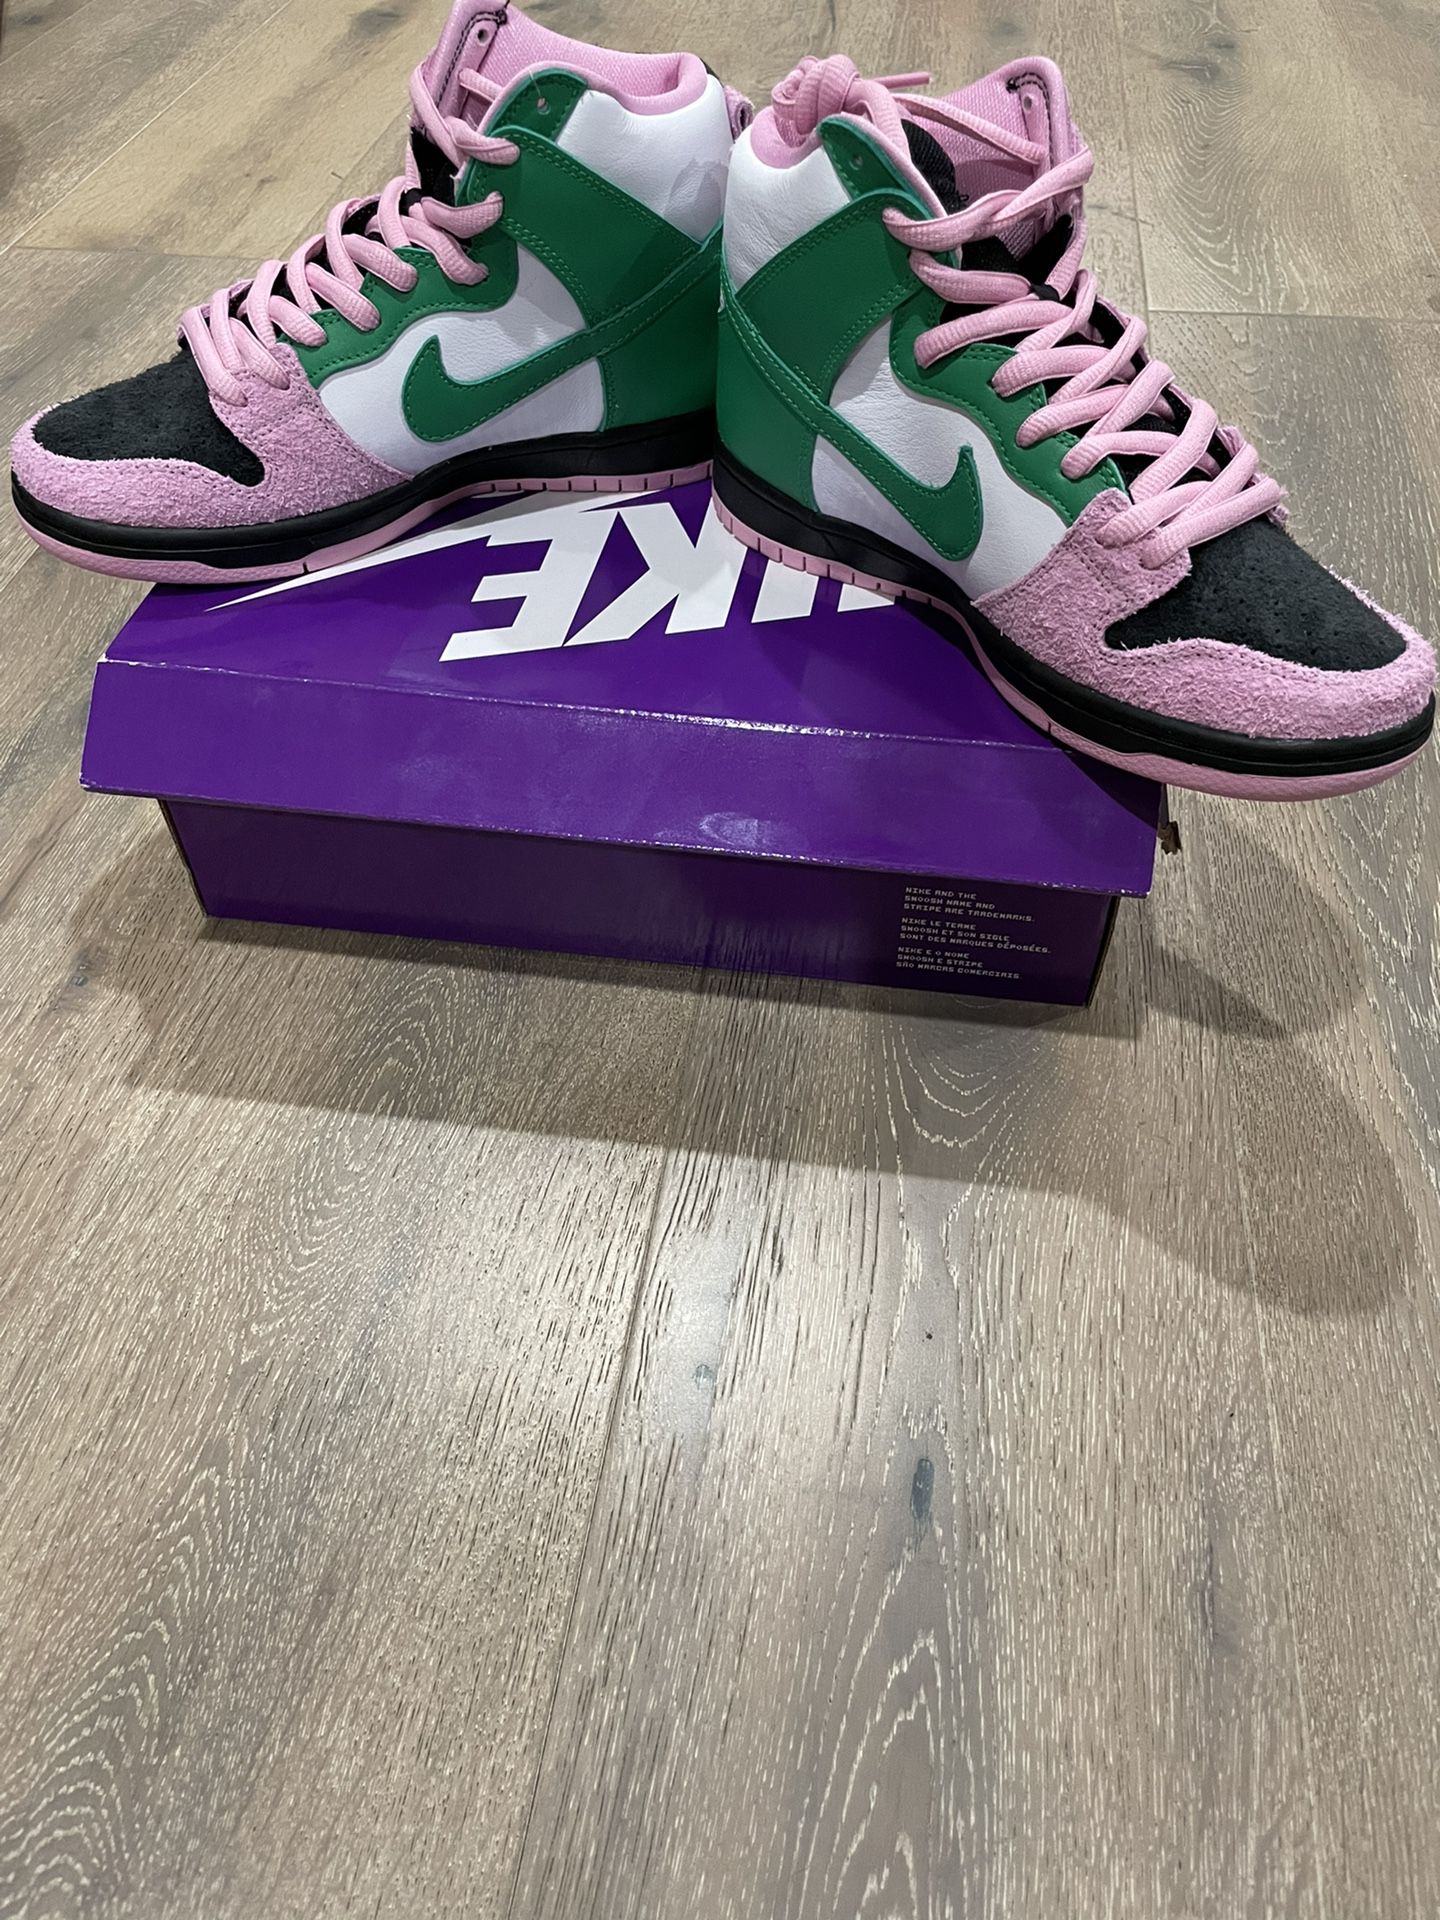 Nike Sb Dunk High Pro Pink And Green for Sale in Los Angeles, CA